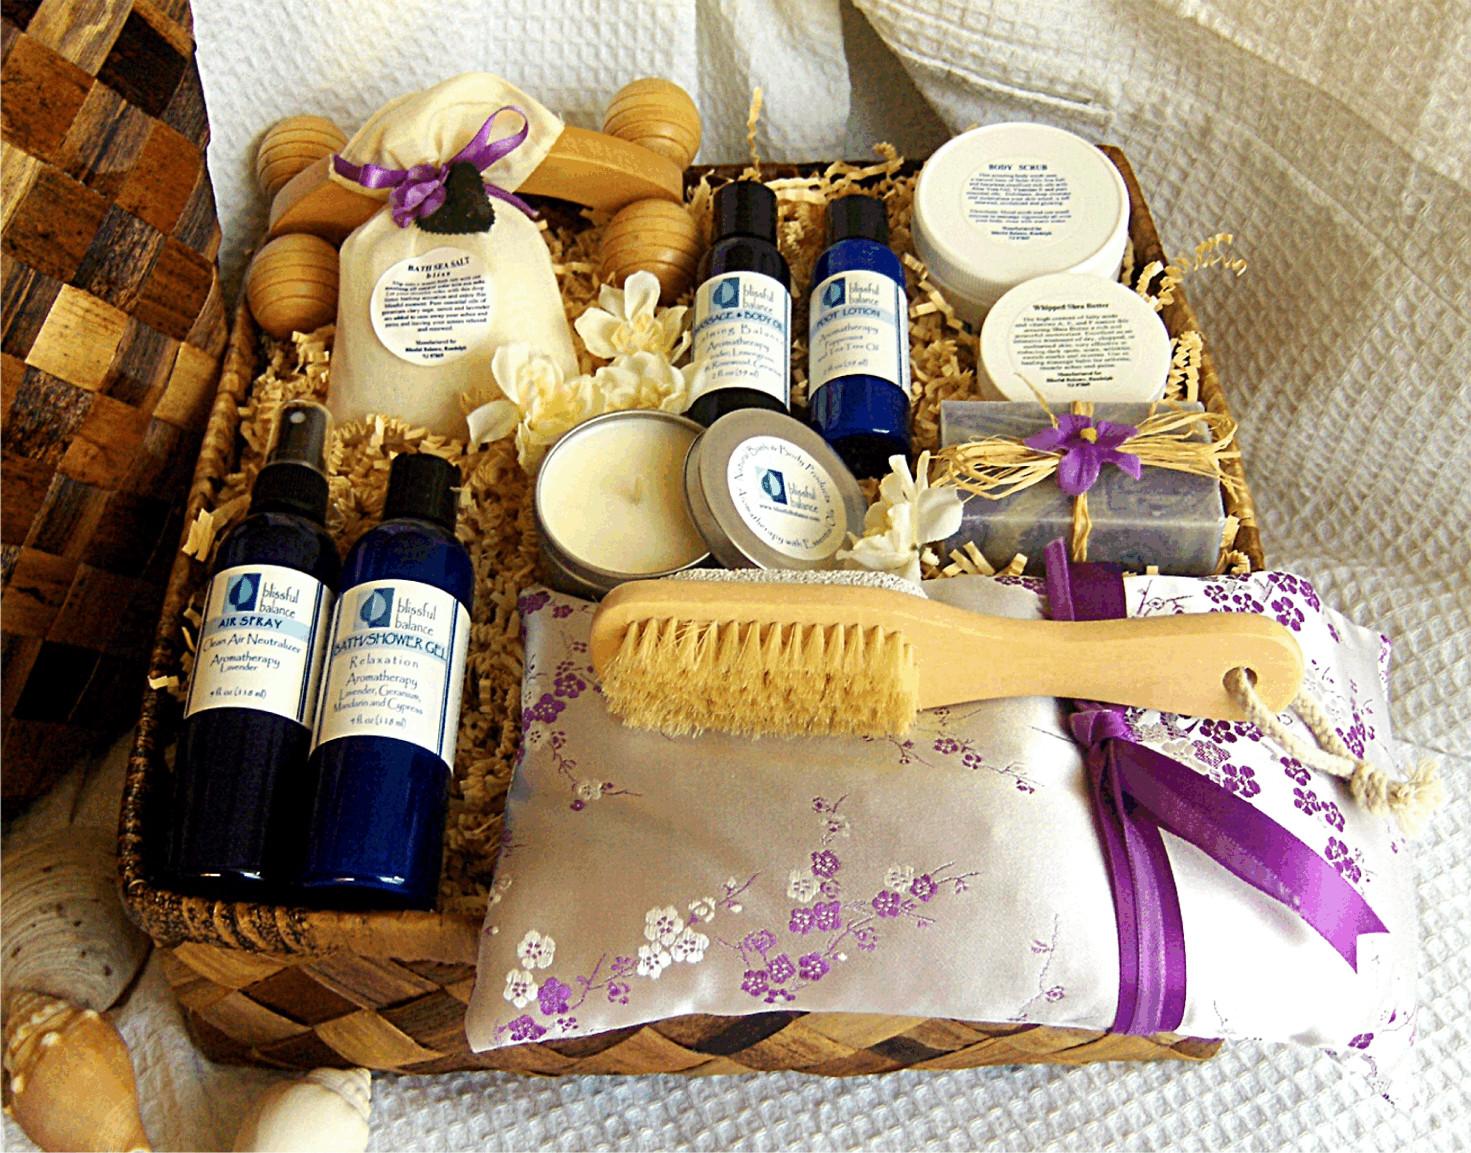 Spa Basket Gift Ideas
 Top 10 Romantic Ideas Gift Basket For Valentine s Day